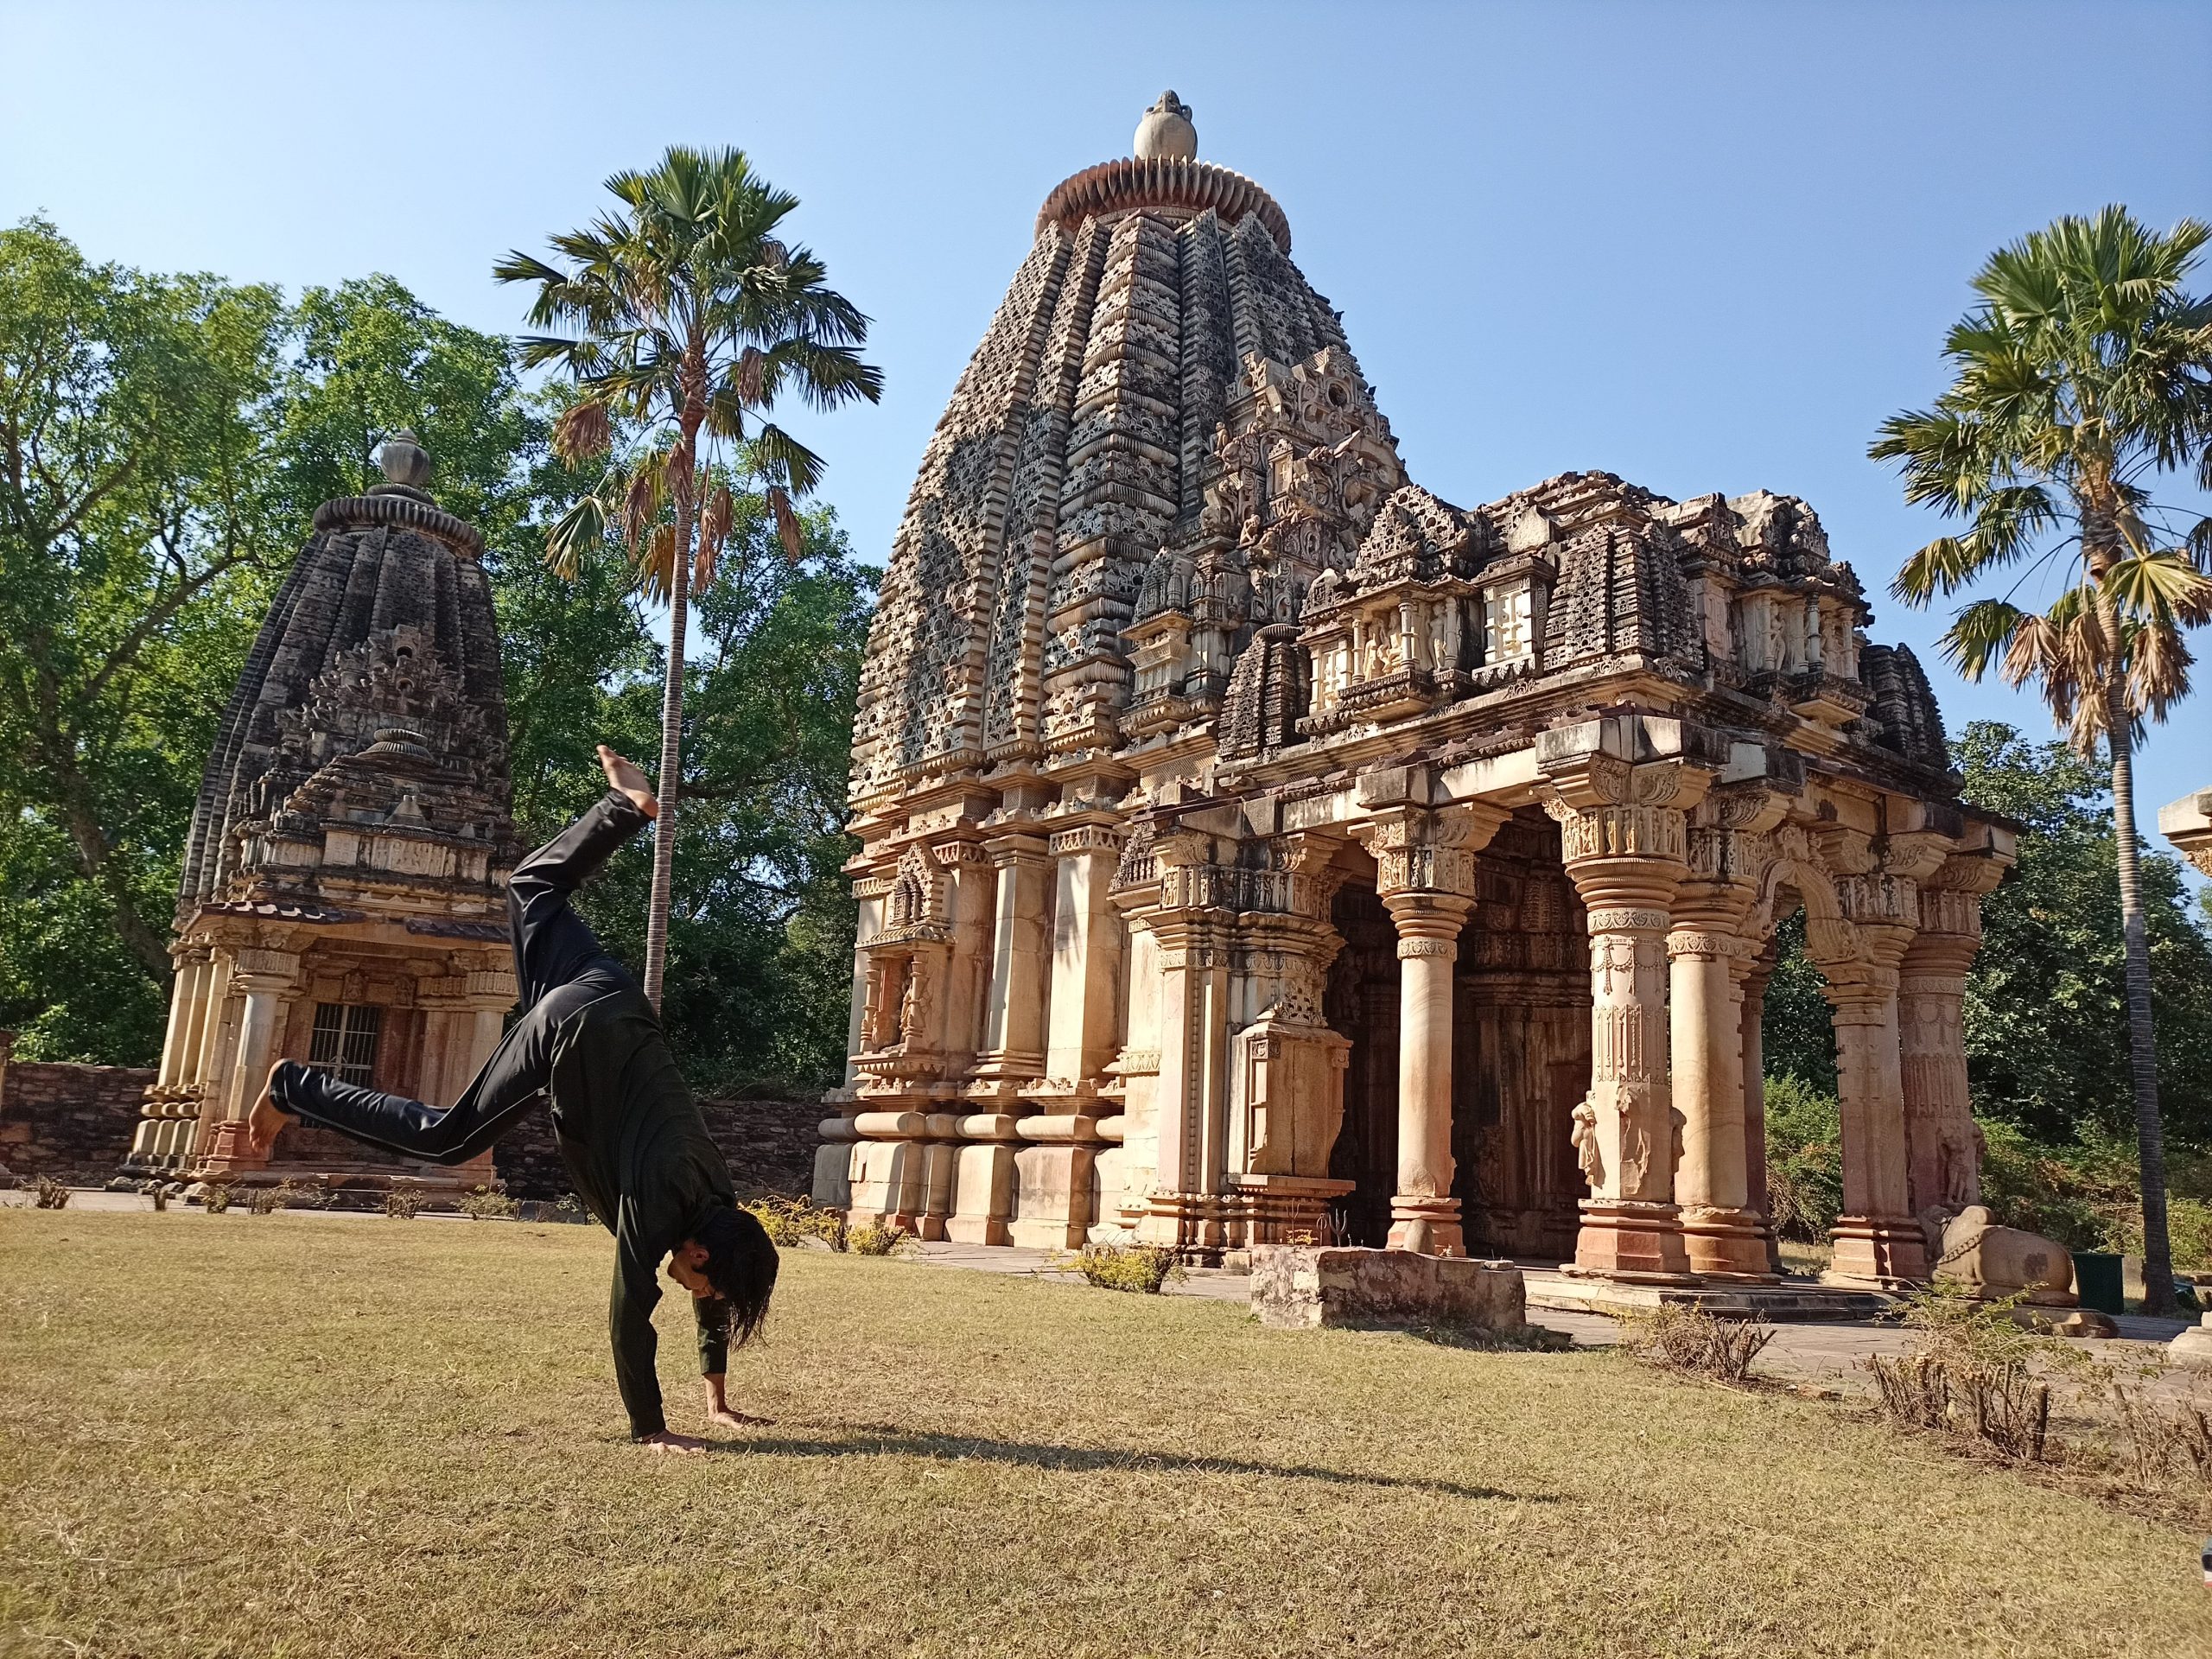 A stunt artist at an historic temple